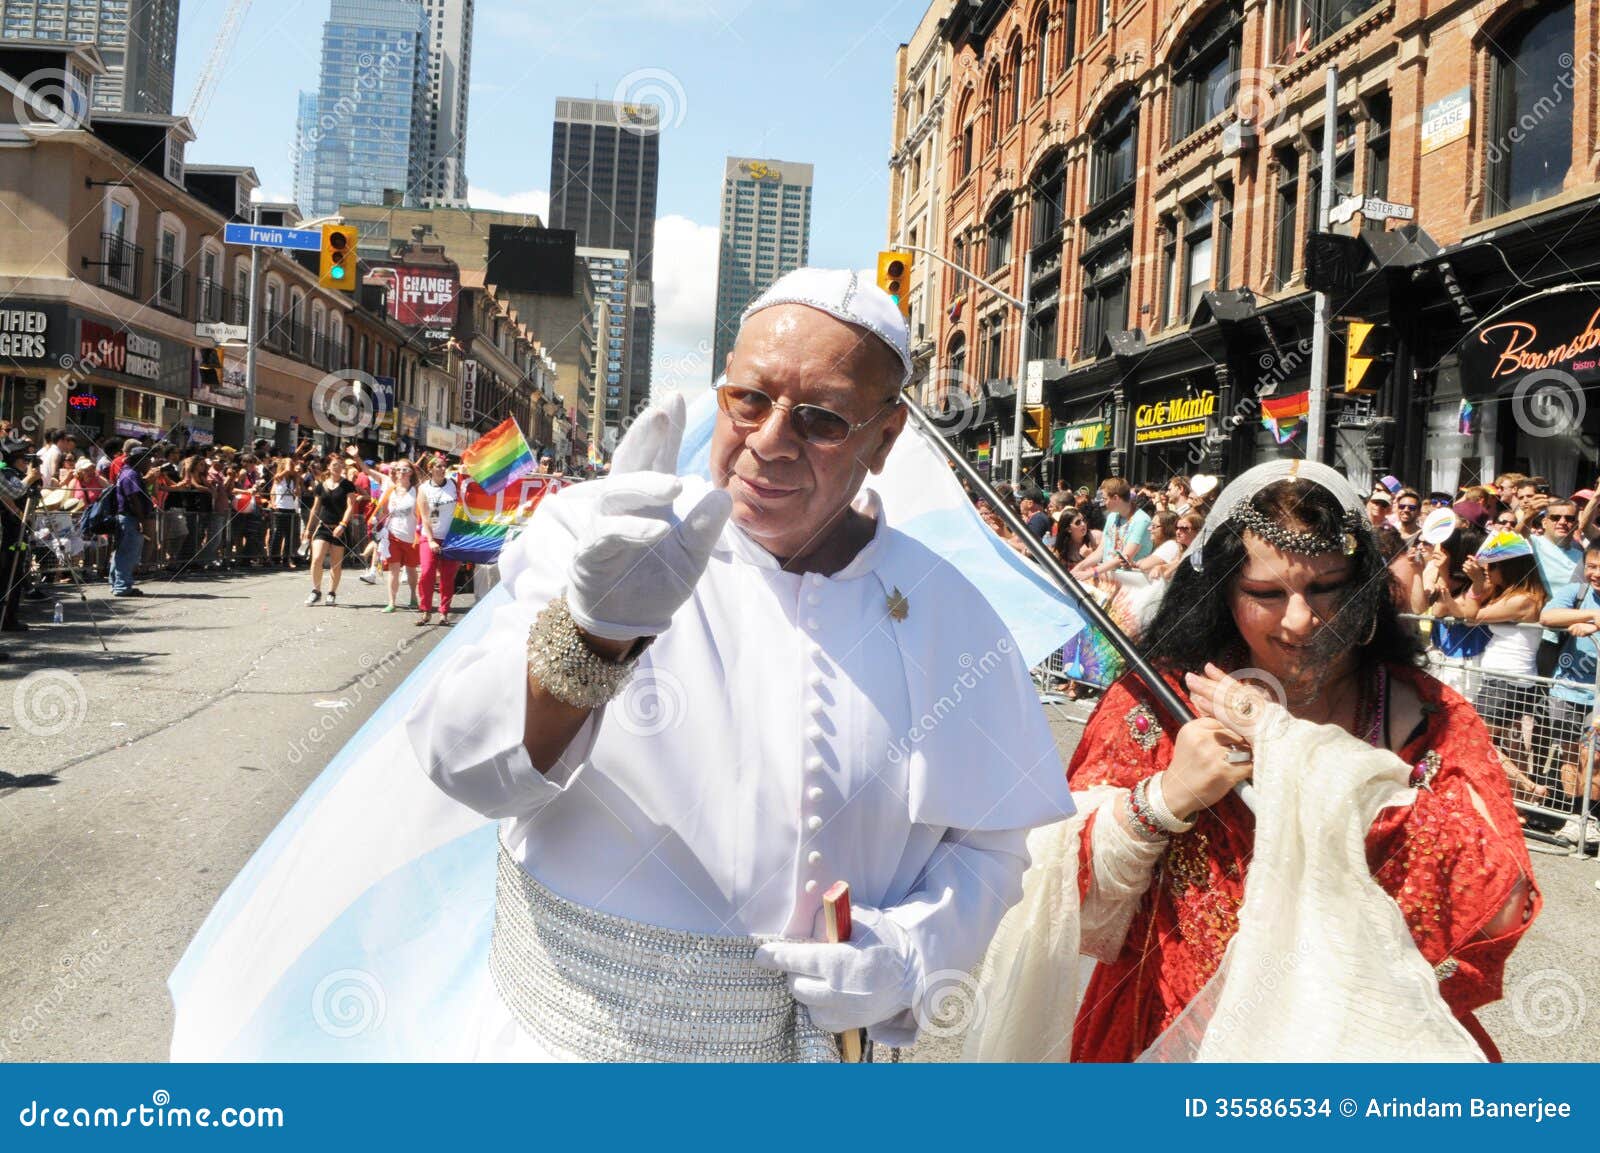 Pride 2014 Editorial Stock Image Image Of Male Costume 35586534